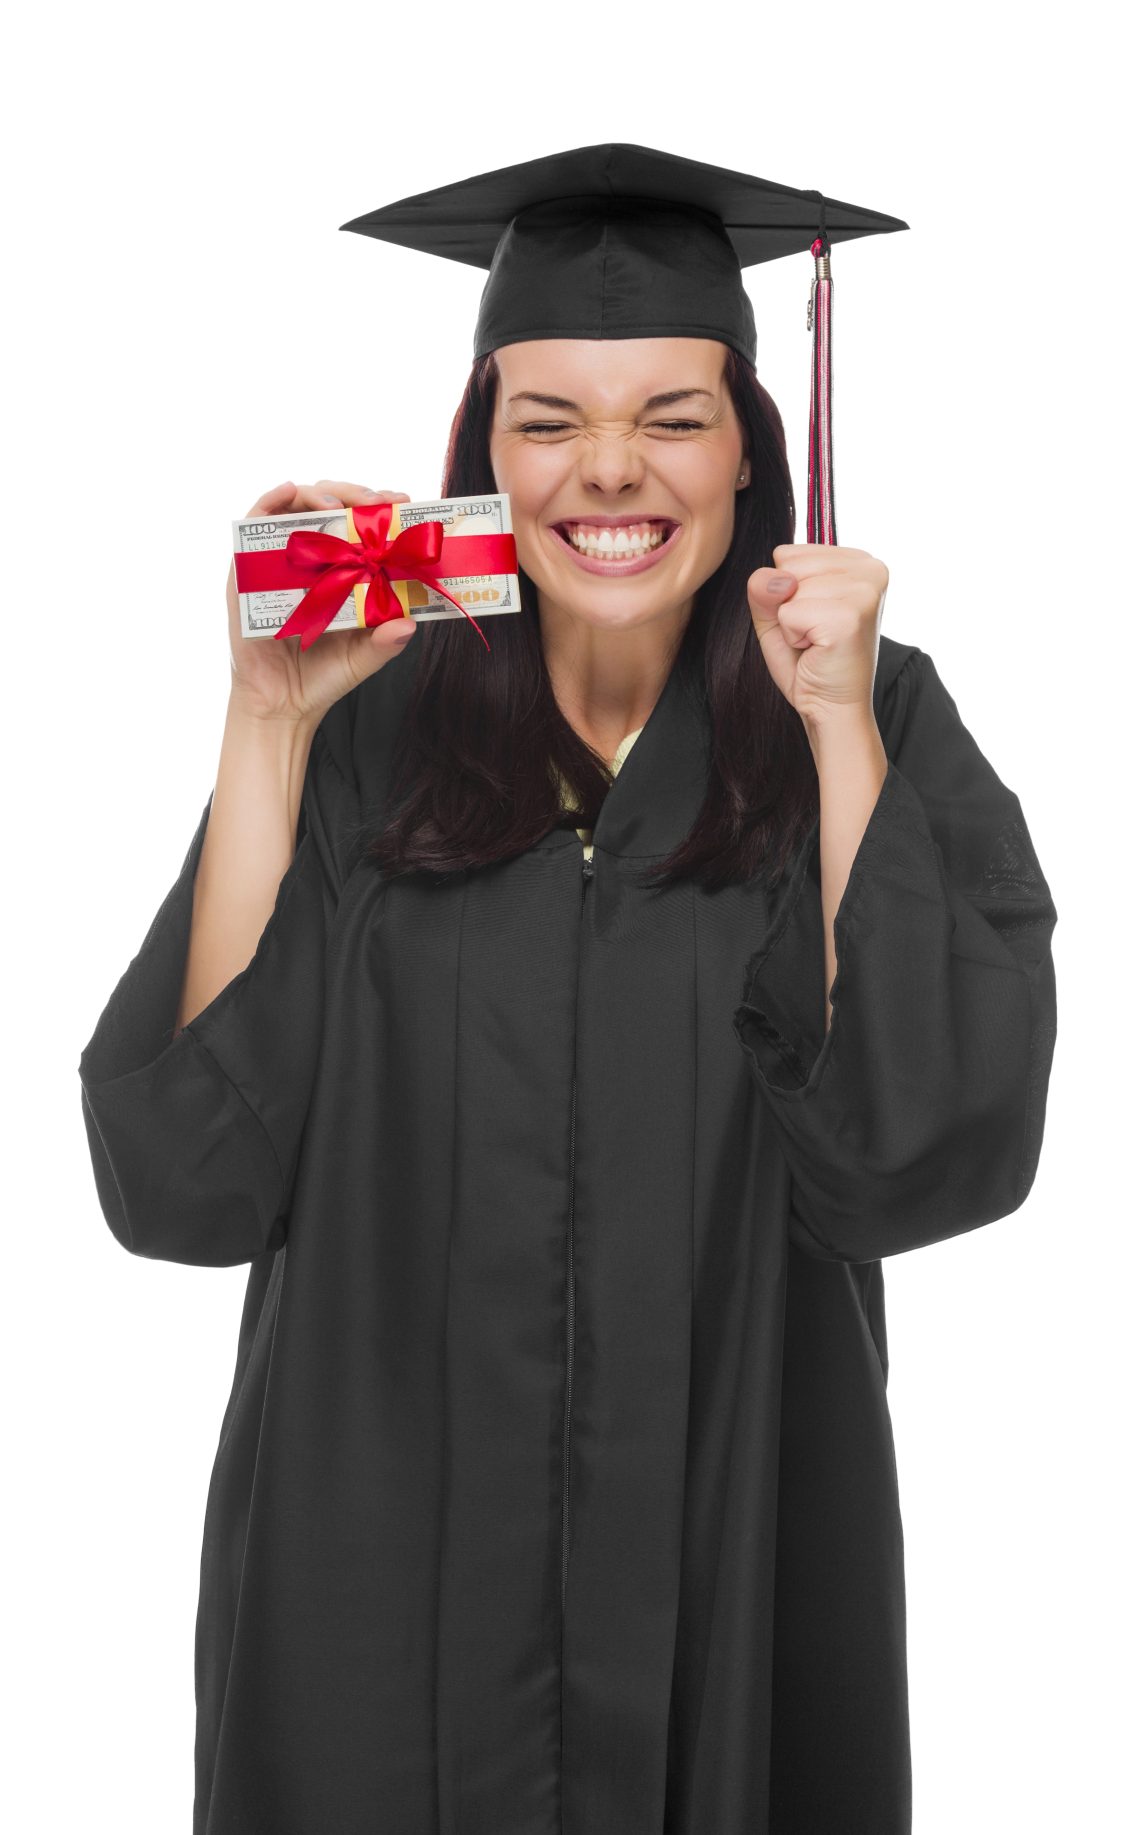 Do You Wonder What to Gift Your Dear One for High School Graduation?